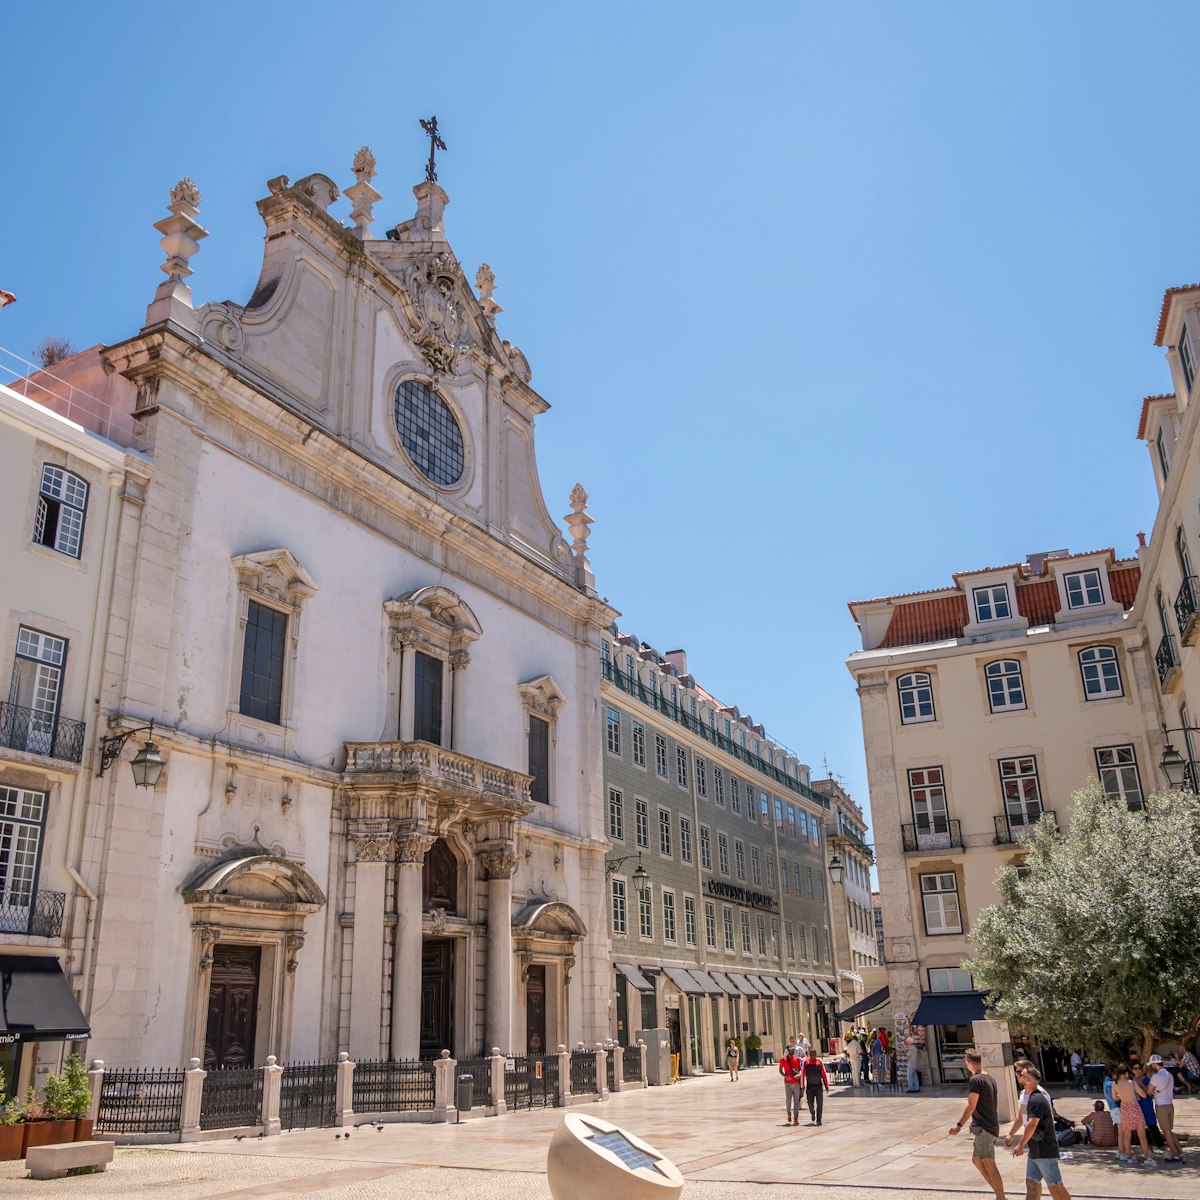 Lisbon, Portugal - July 30, 2023: Beautiful Church of Saint Dominic in Lisbon's old city.
1699254117
chruch, of, saint dominic, beautiful, destination, famous, port, streets, traditional, urban, vista